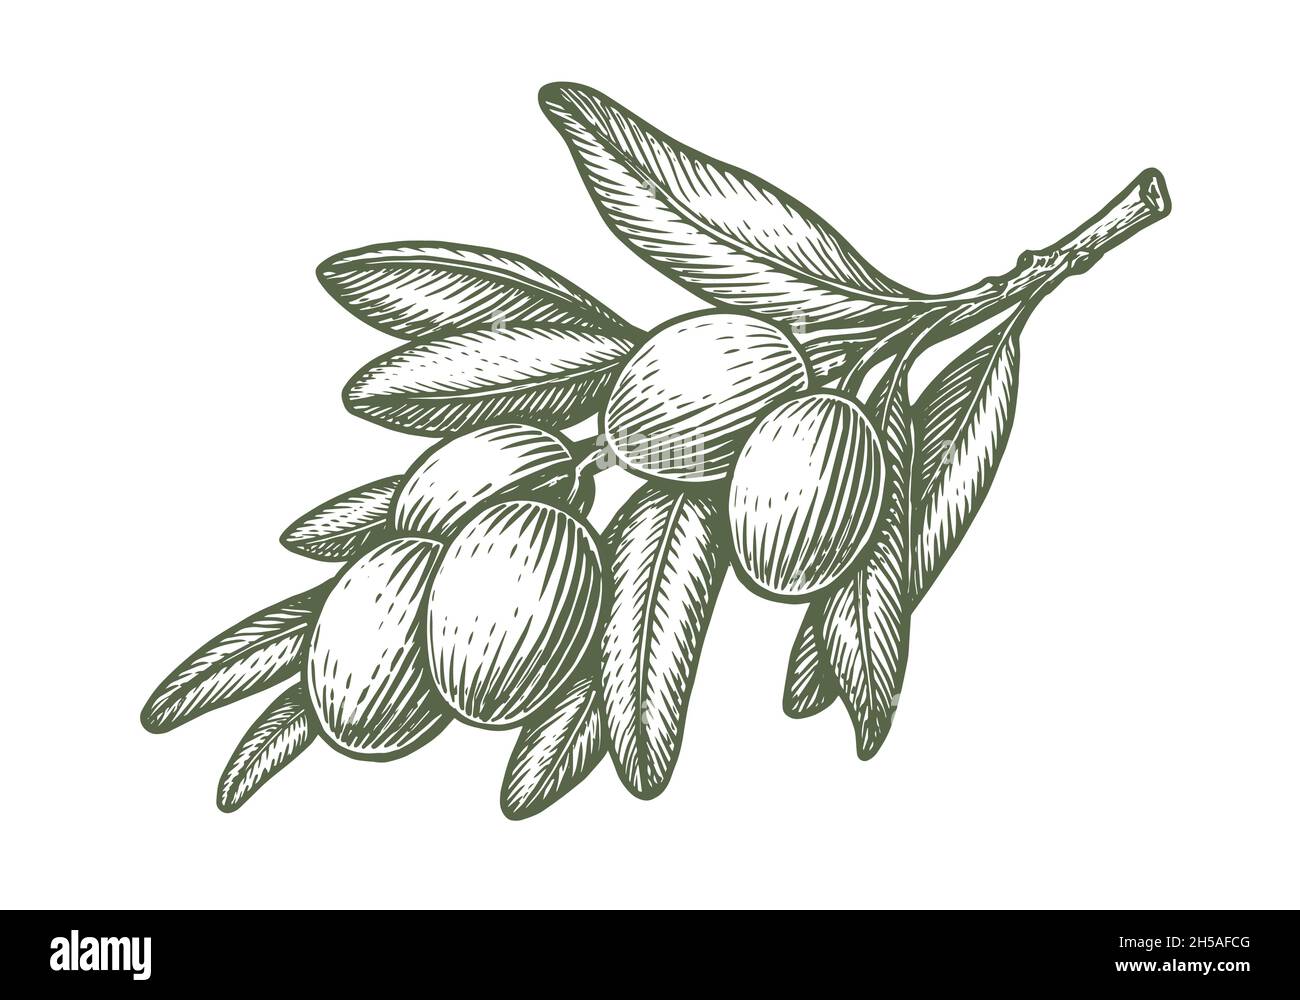 21759 Olive Tree Drawing Images Stock Photos  Vectors  Shutterstock